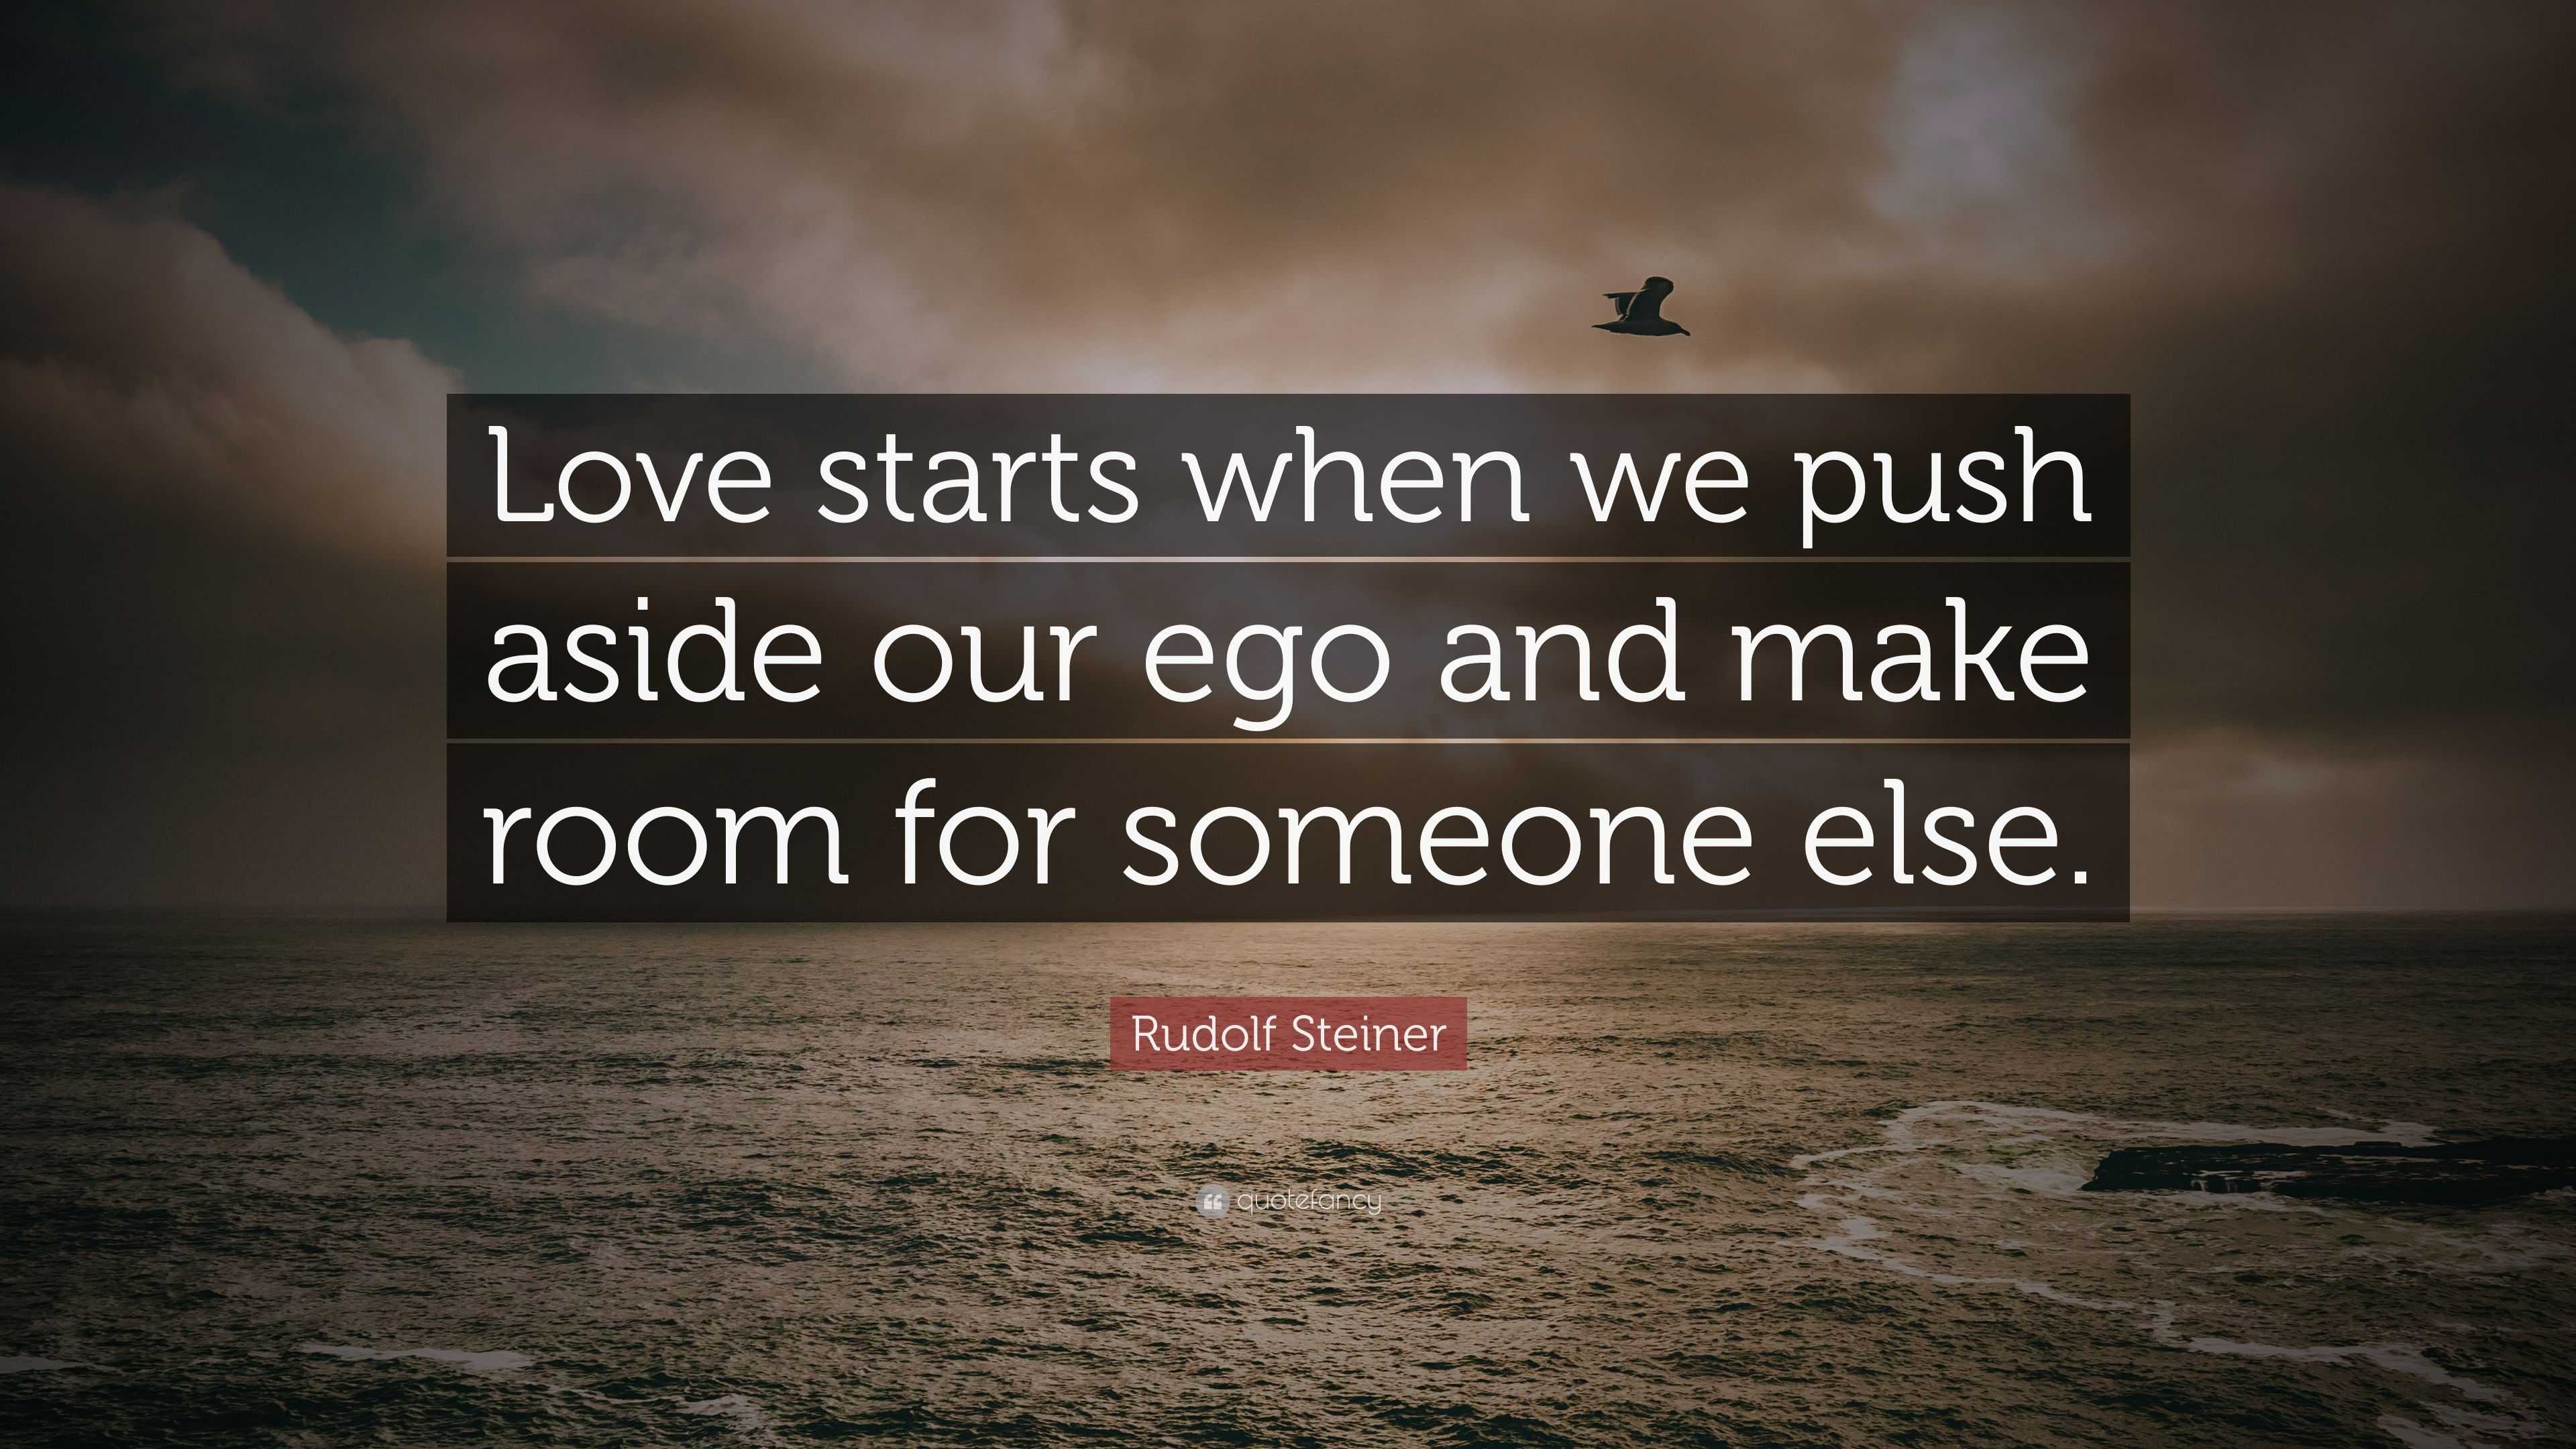 2083167 Rudolf Steiner Quote Love starts when we push aside our ego and